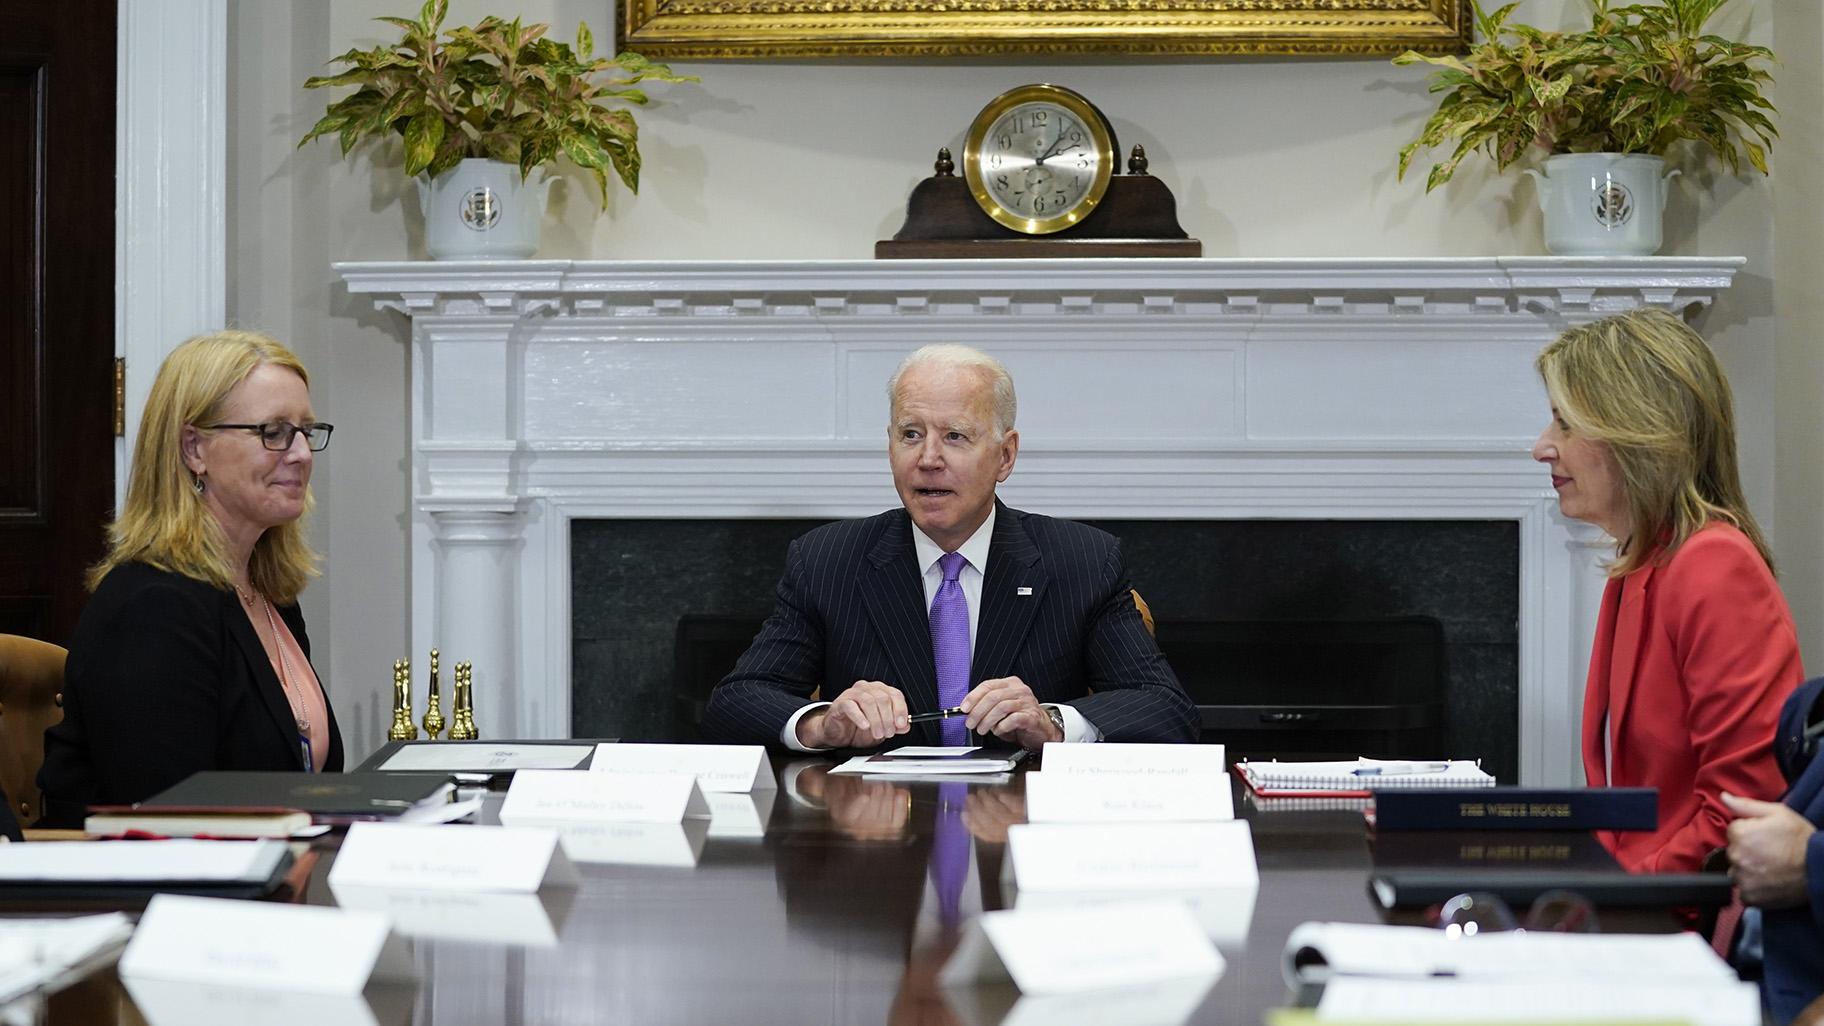 President Joe Biden speaks during a meeting with FEMA Administrator Deanne Criswell, left, and Homeland Security Adviser and Deputy National Security Adviser Elizabeth Sherwood-Randall, right, in the Roosevelt Room of the White House, Tuesday, June 22, 2021, in Washington. (AP Photo / Evan Vucci)